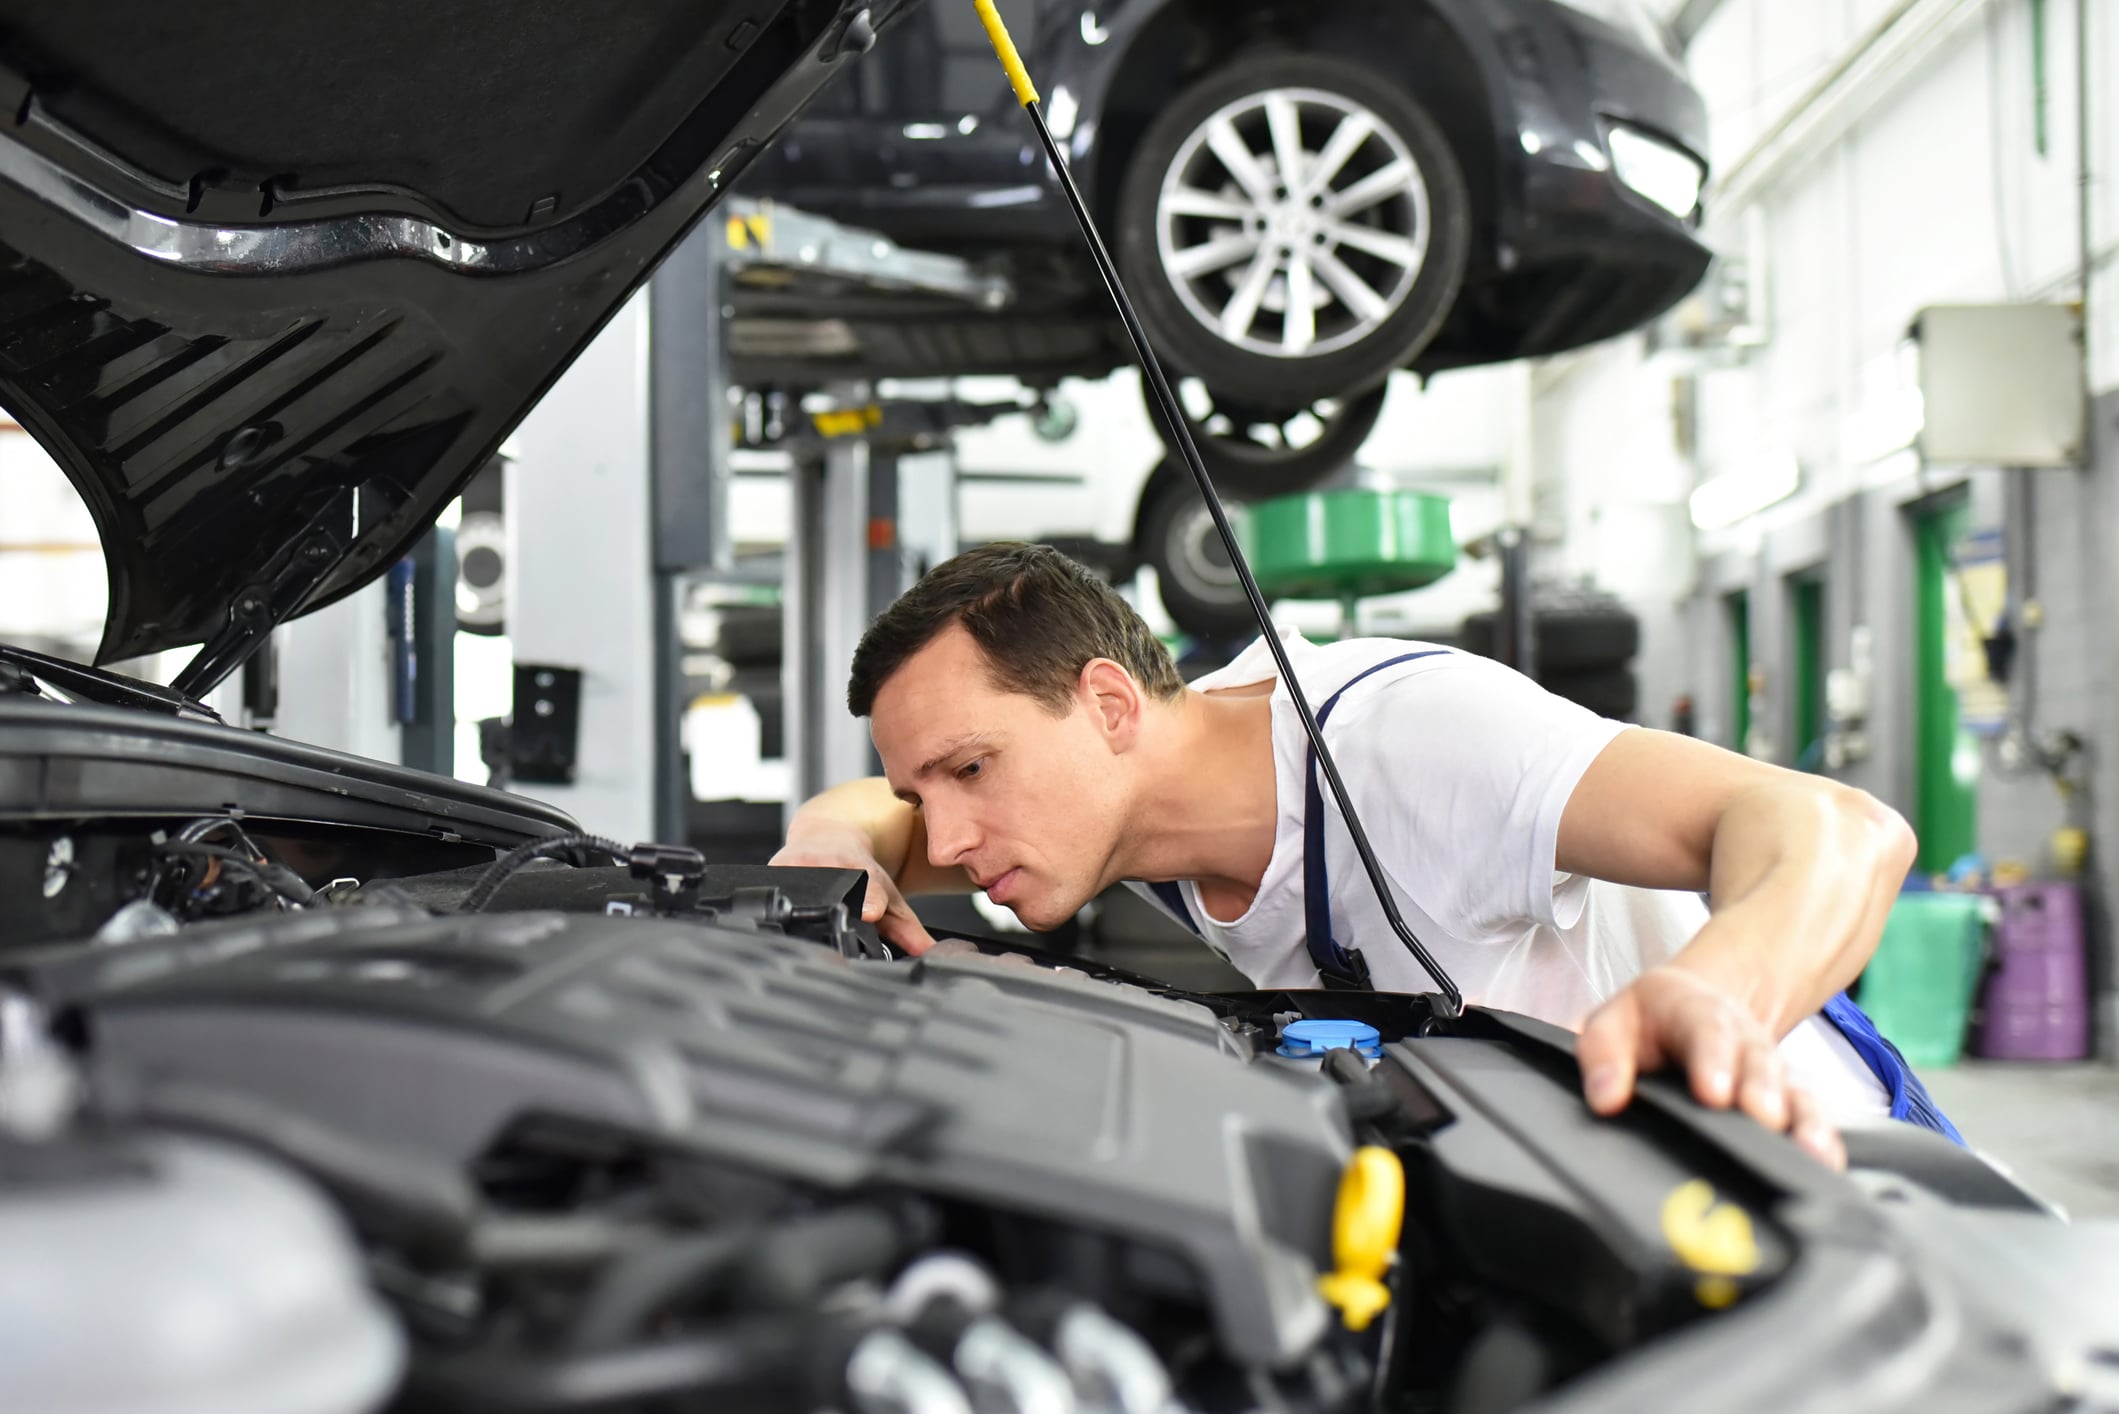 What Auto Mechanics Should Know Before Servicing Electric Cars